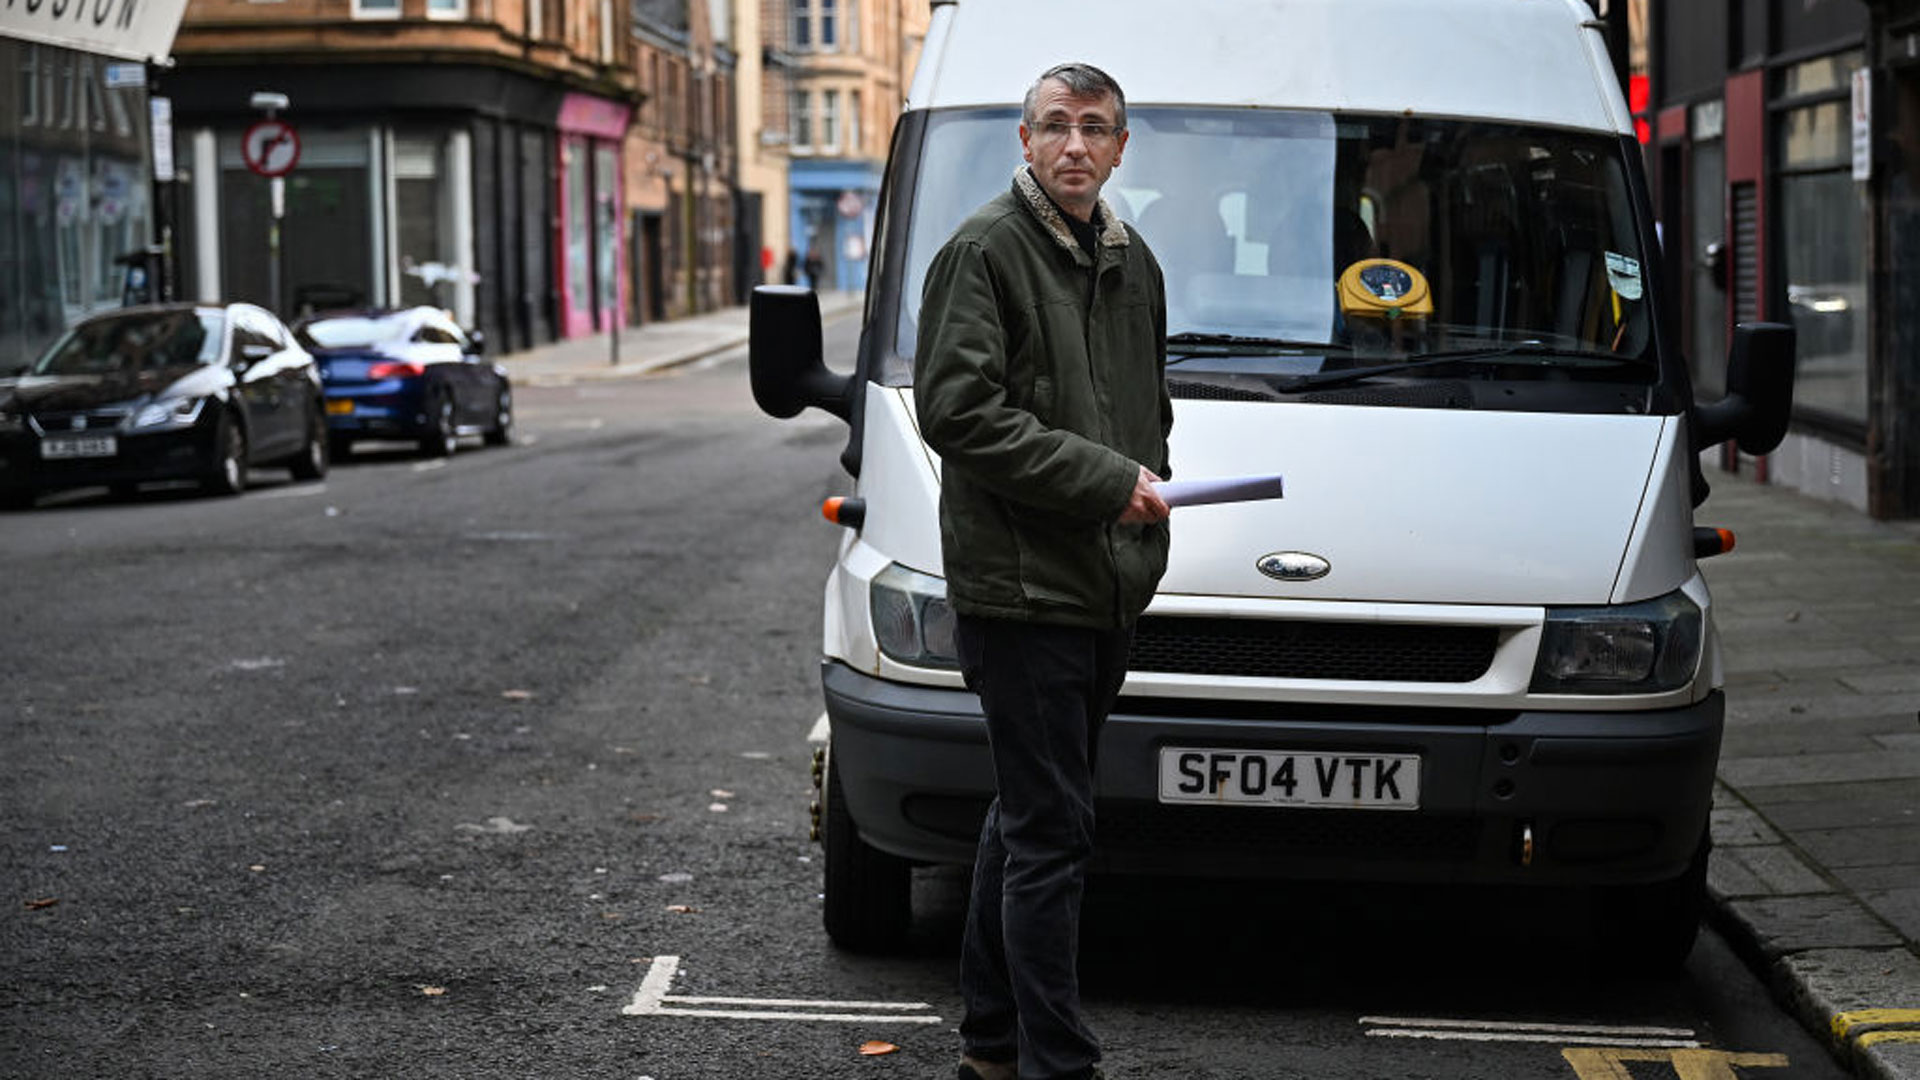 Peter Krykant outside his safe consumption van in Glasgow, Scotland. An important part of the fight against drug-related deaths